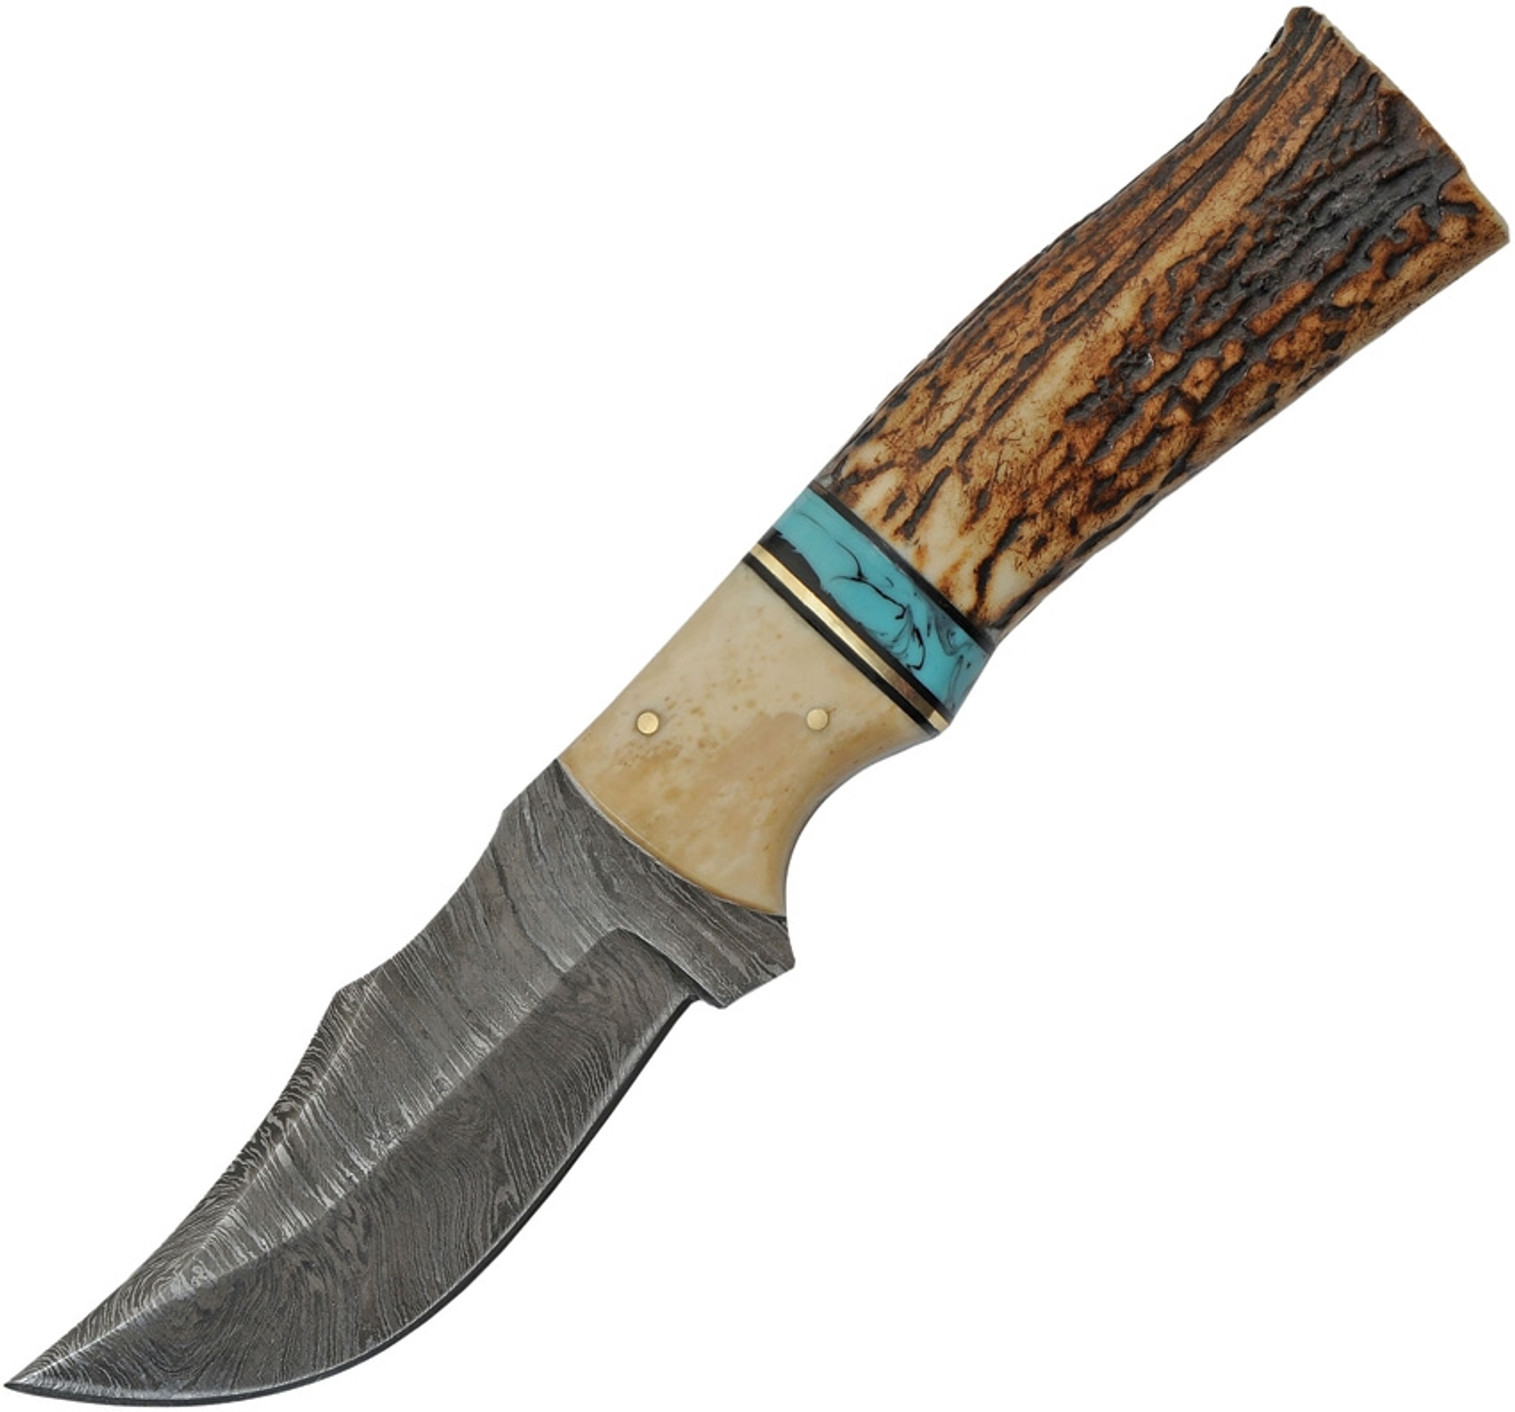 Stag and Turquoise Skinner